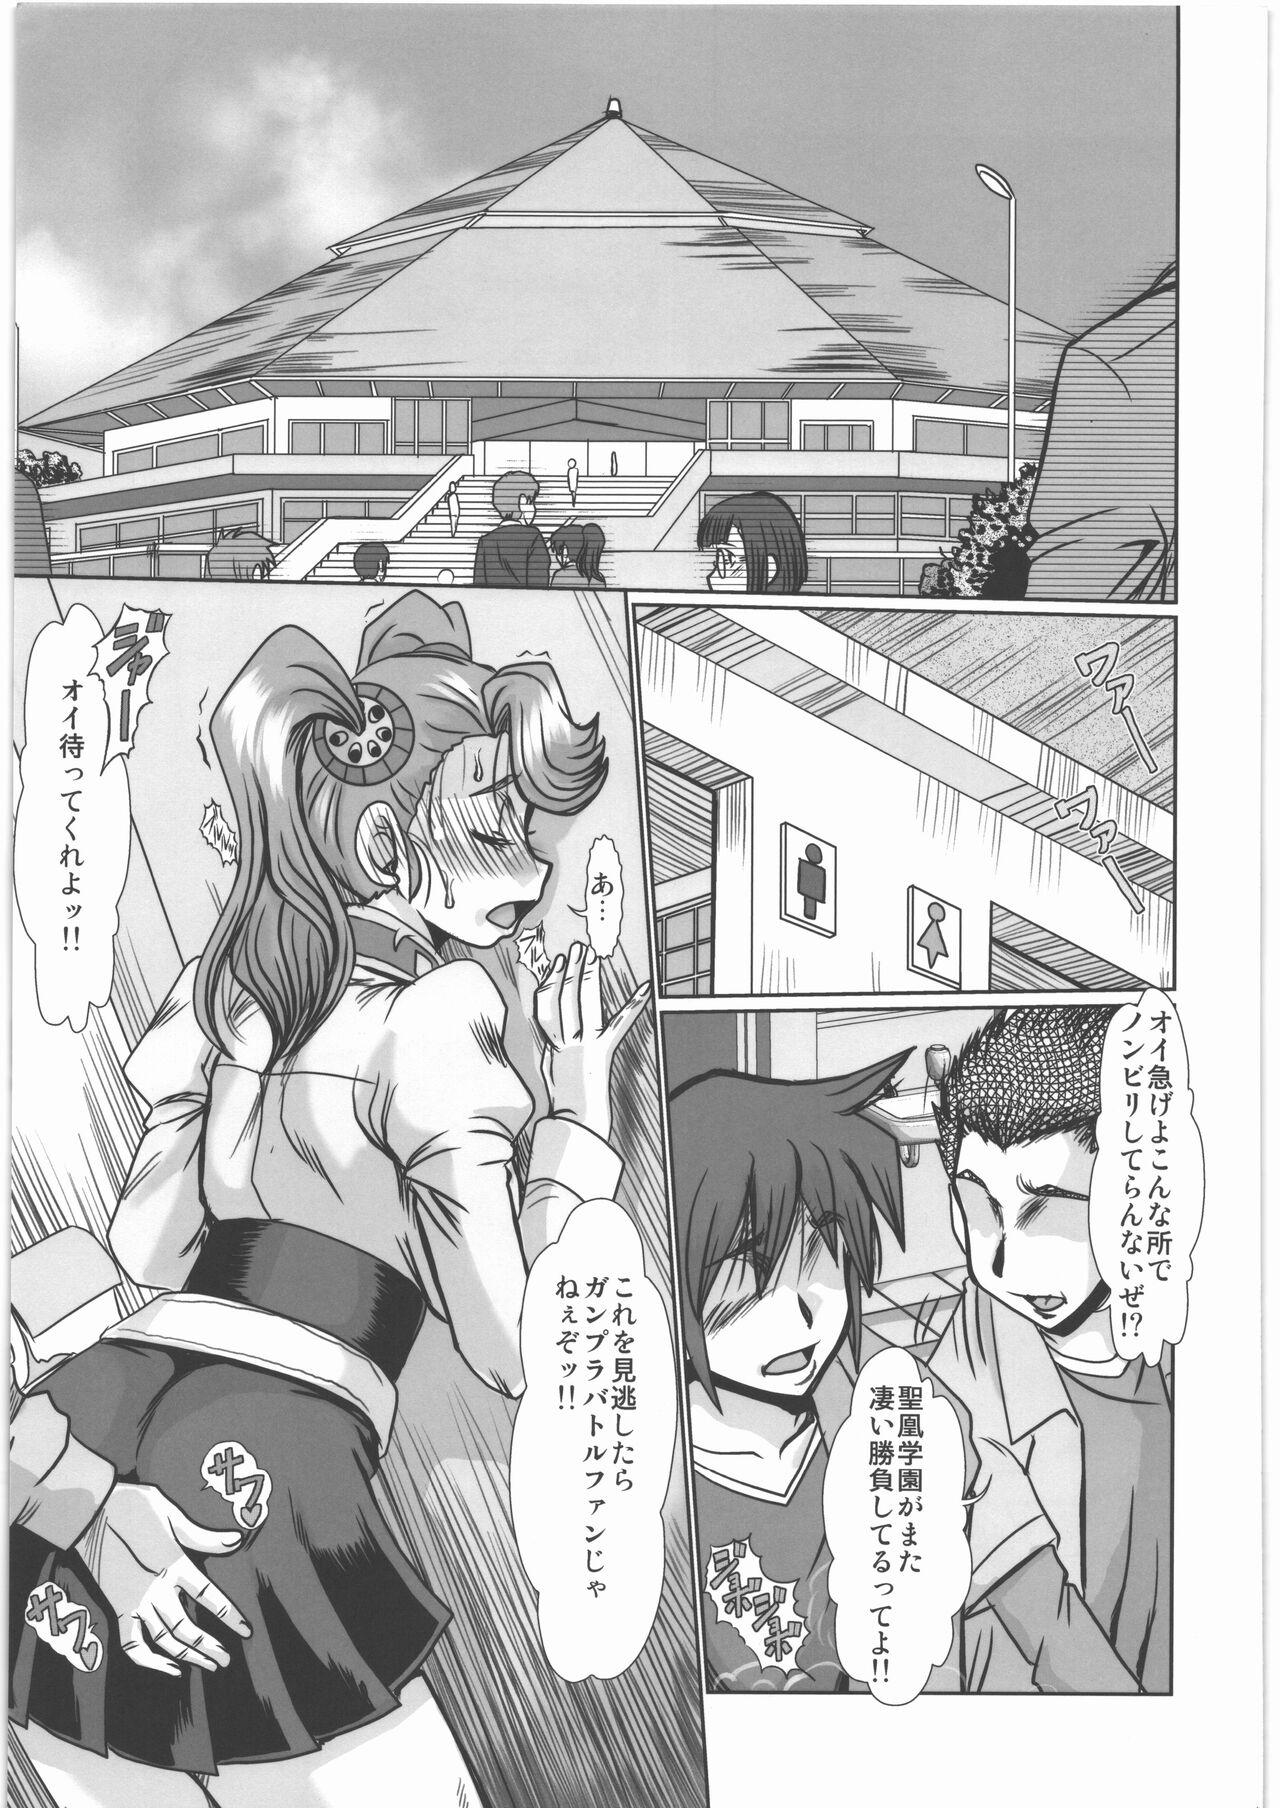 Best Blowjob Ever F-84 - Gundam build fighters try Tied - Page 2